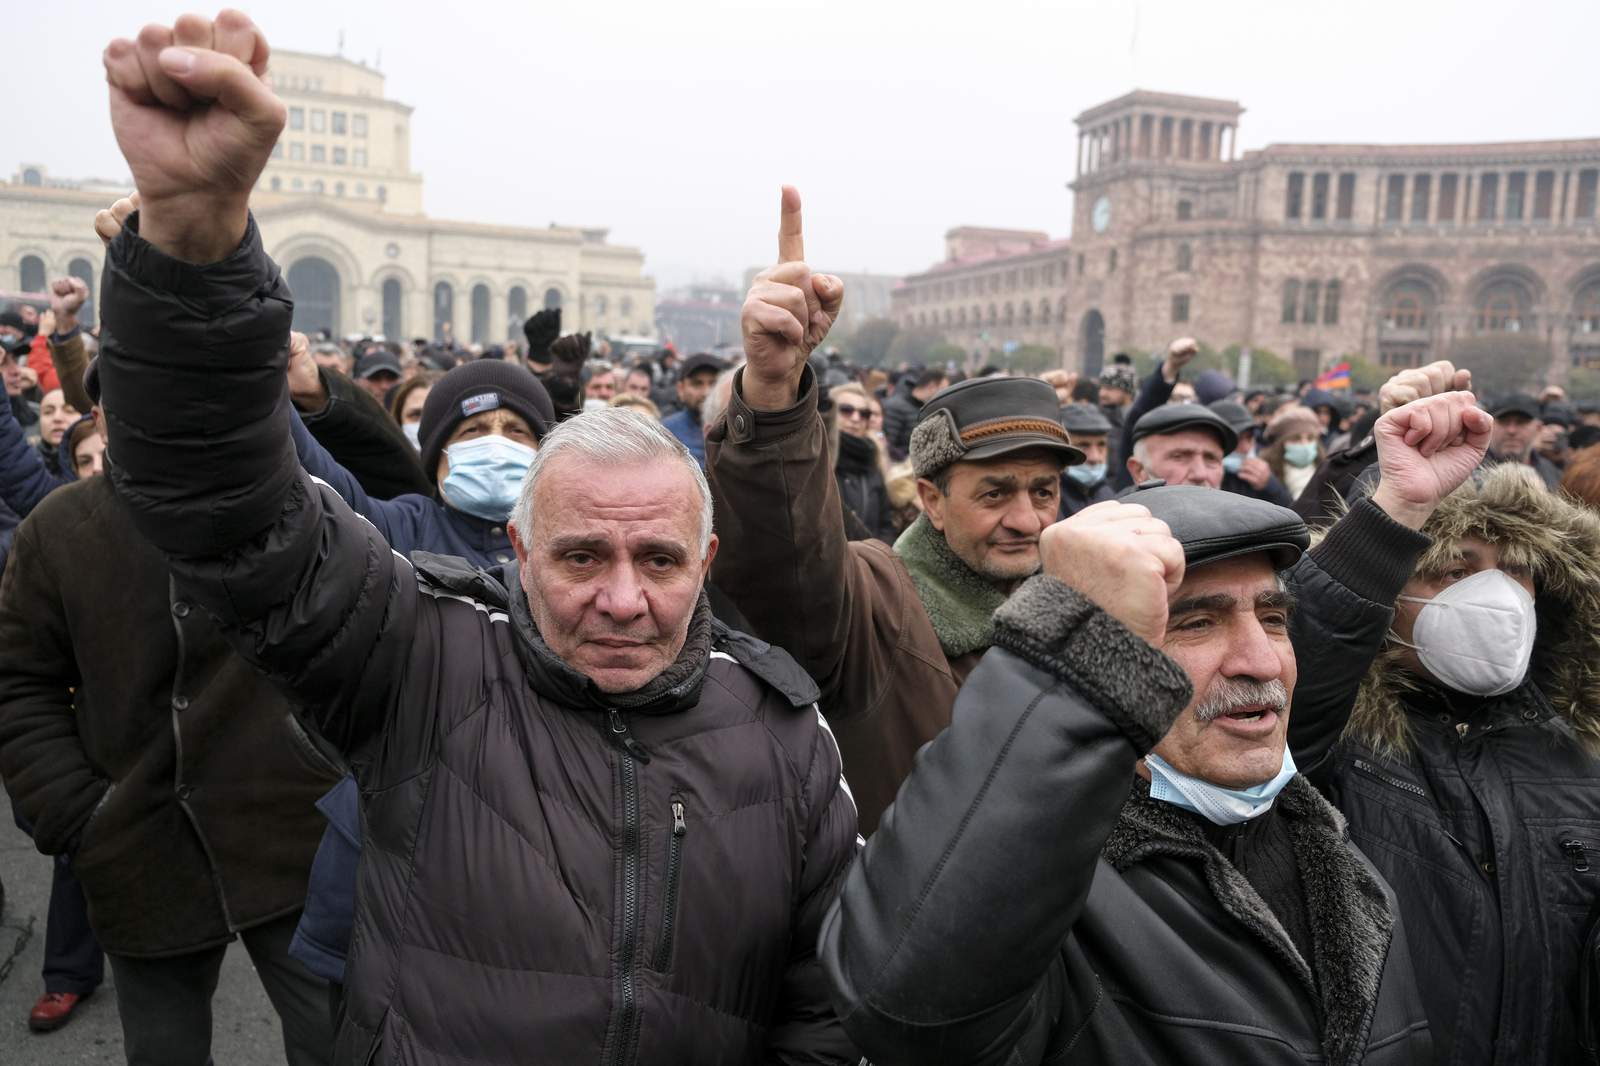 Thousands protest in Armenia, demand PM's resignation